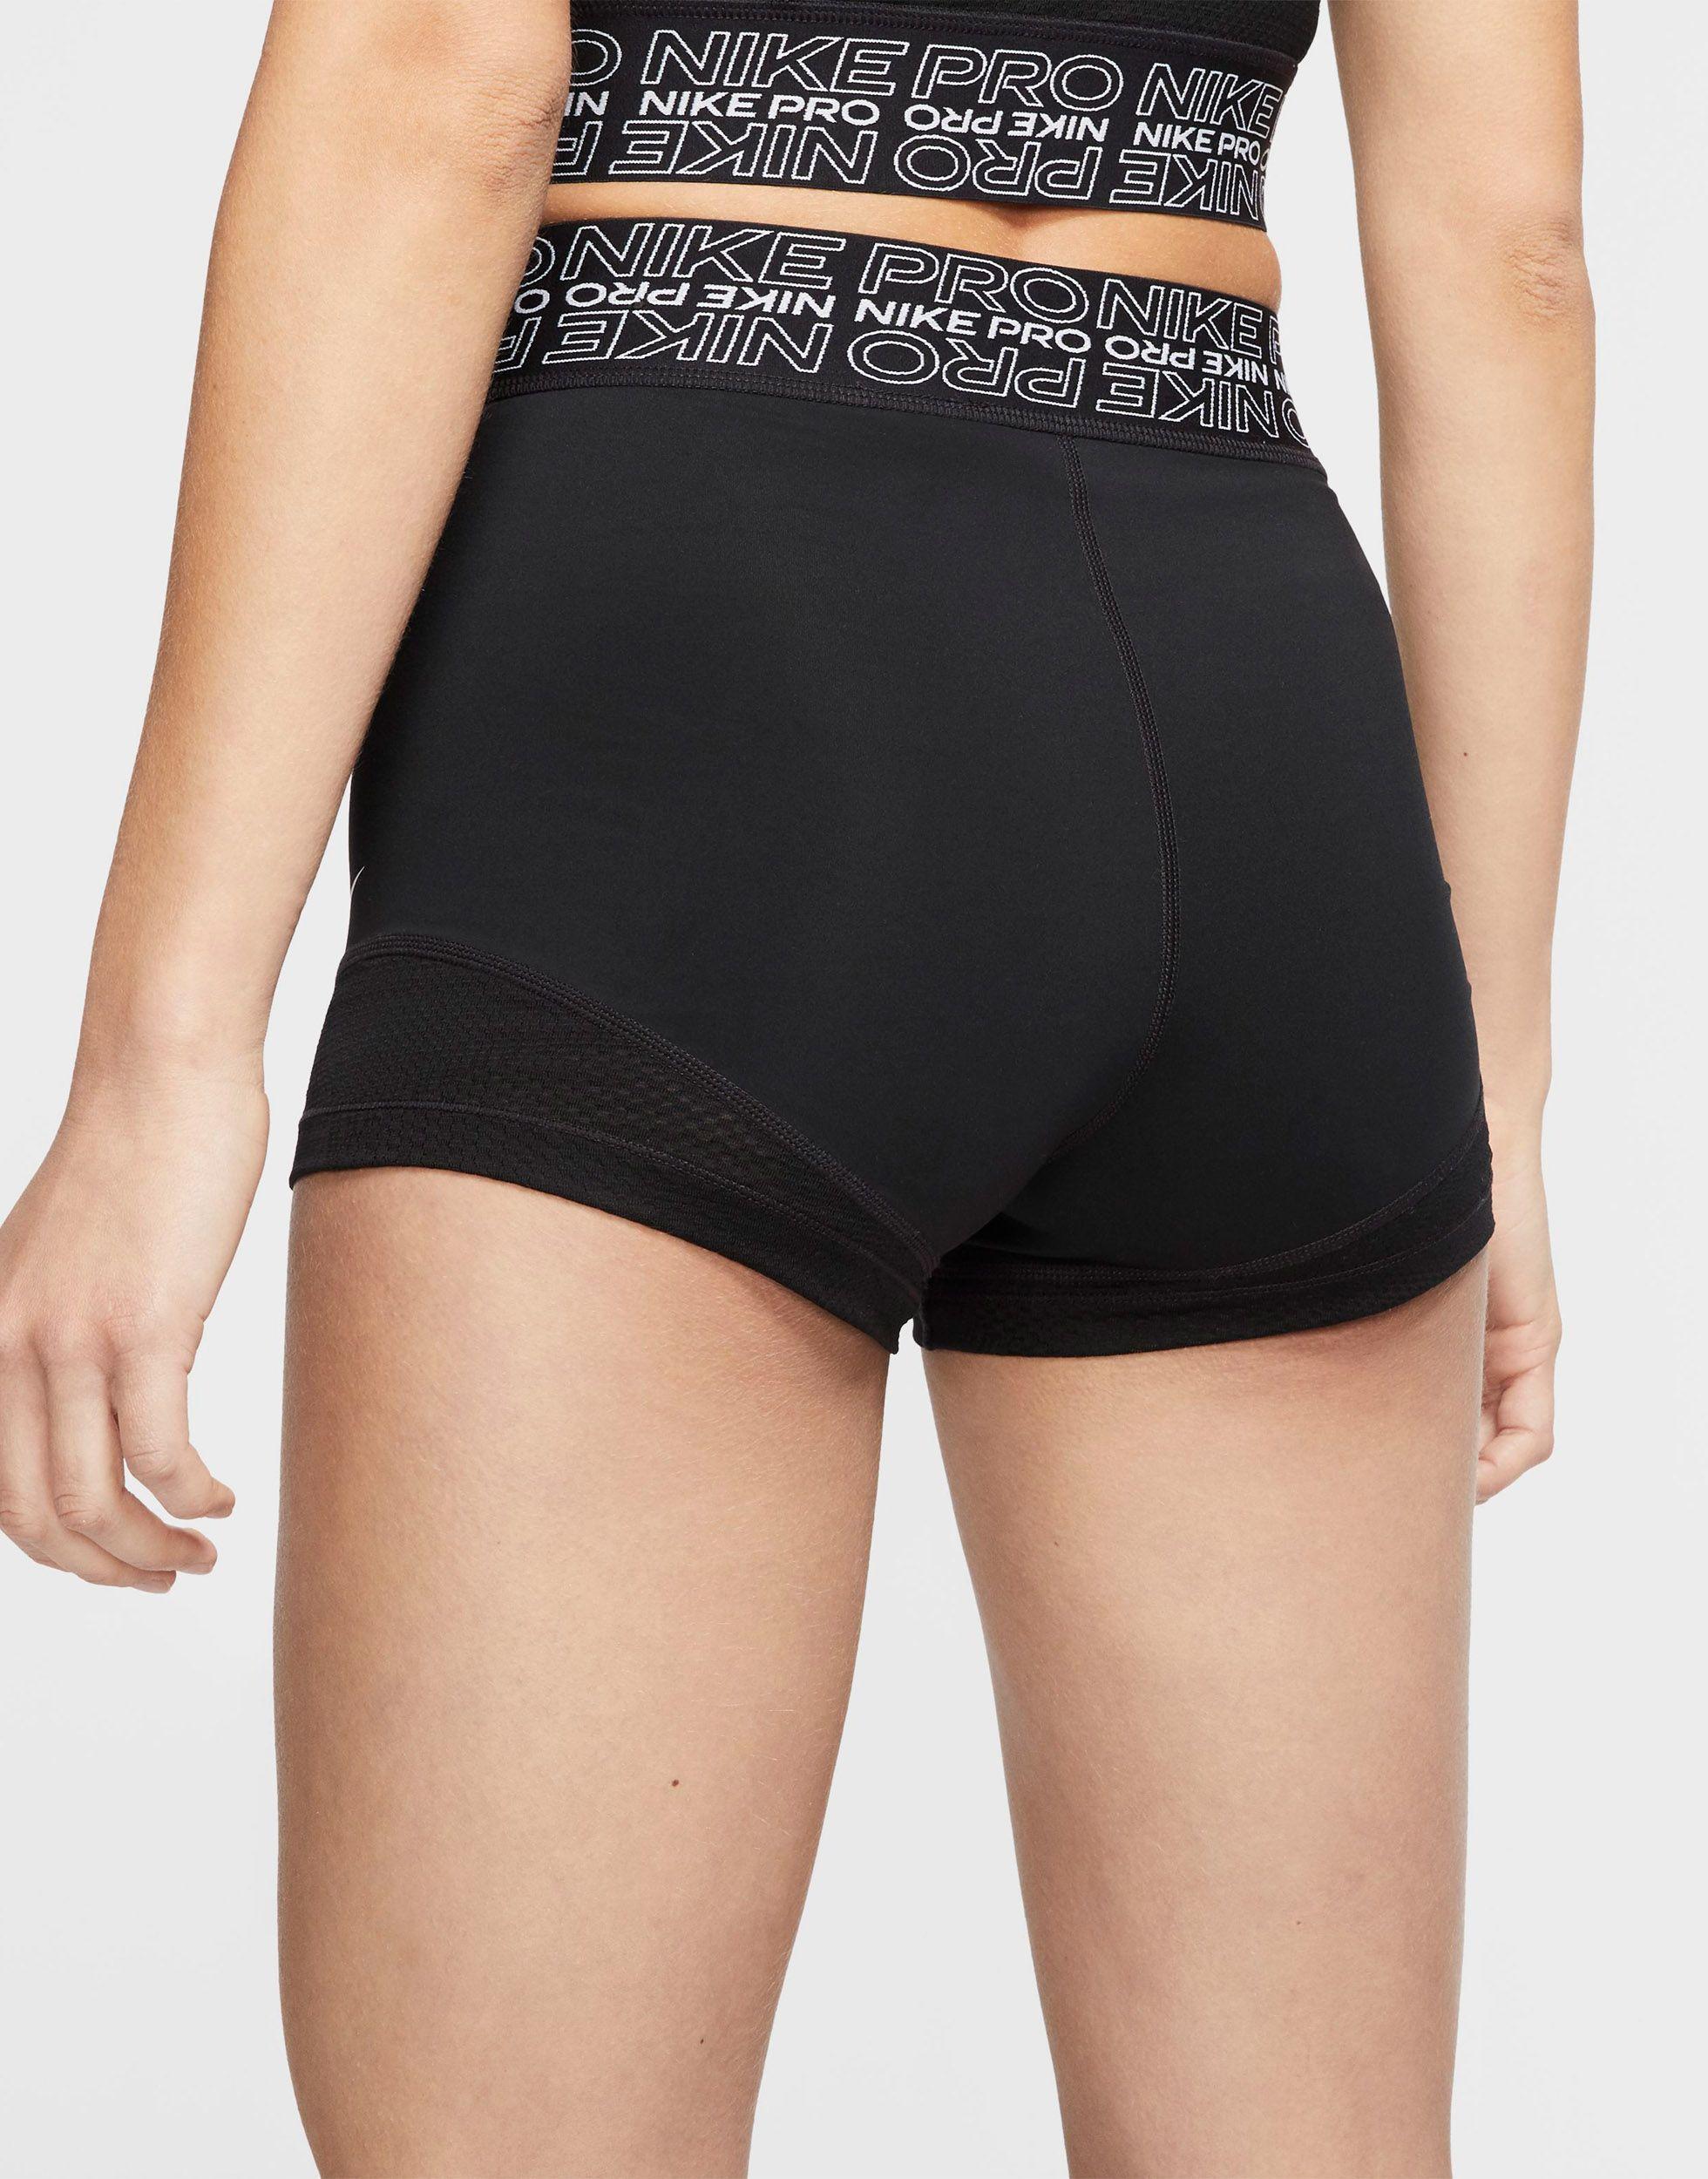 Nike Nike Pro Training 3 Inch Shorts With Mesh Inserts in Black | Lyst